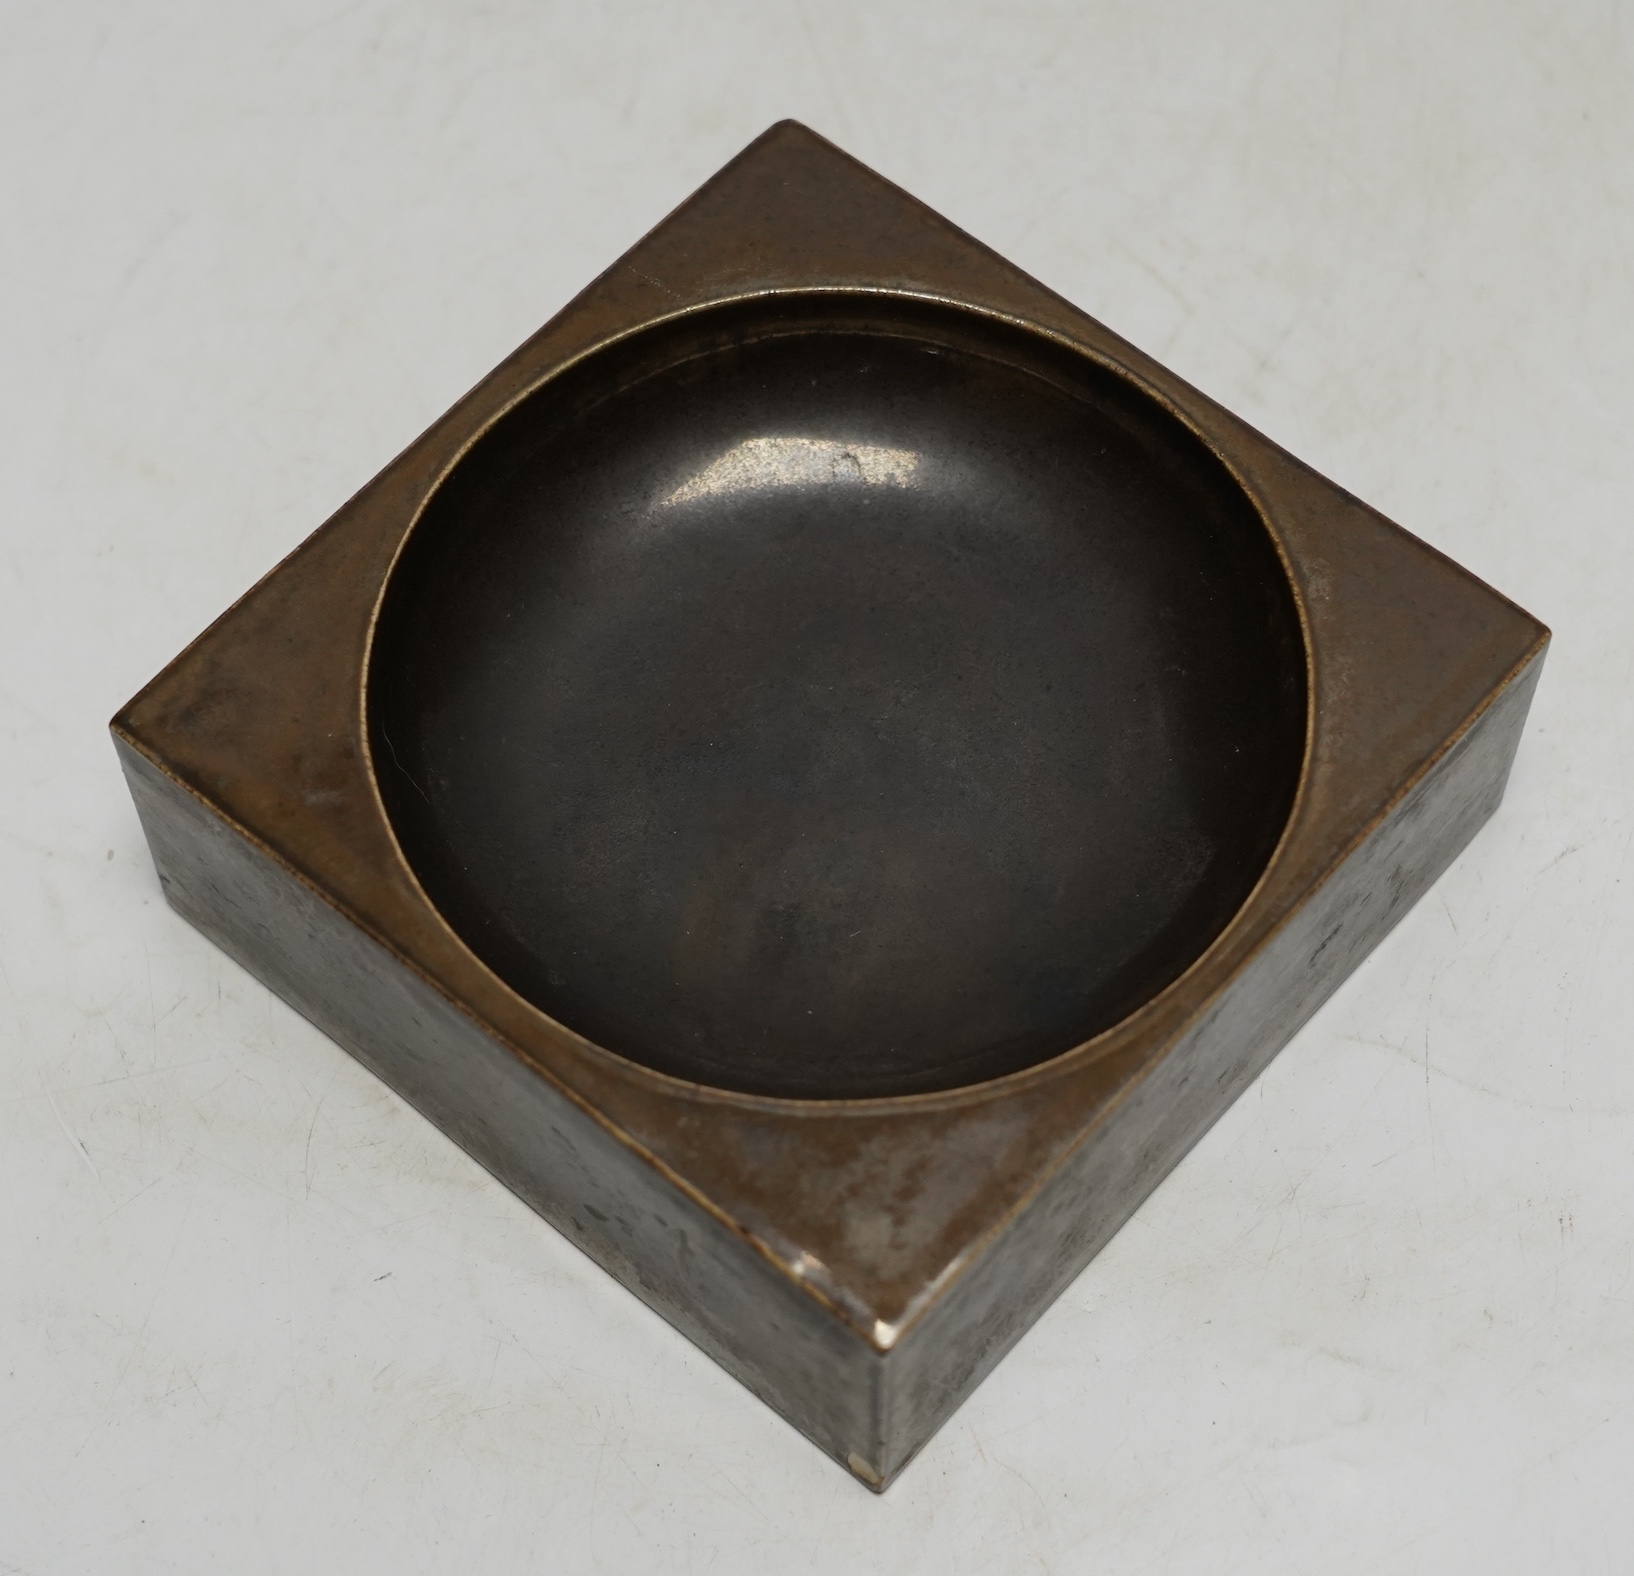 A Troika square dish, initialled RSB?, 12.5cm sq. (a.f.)